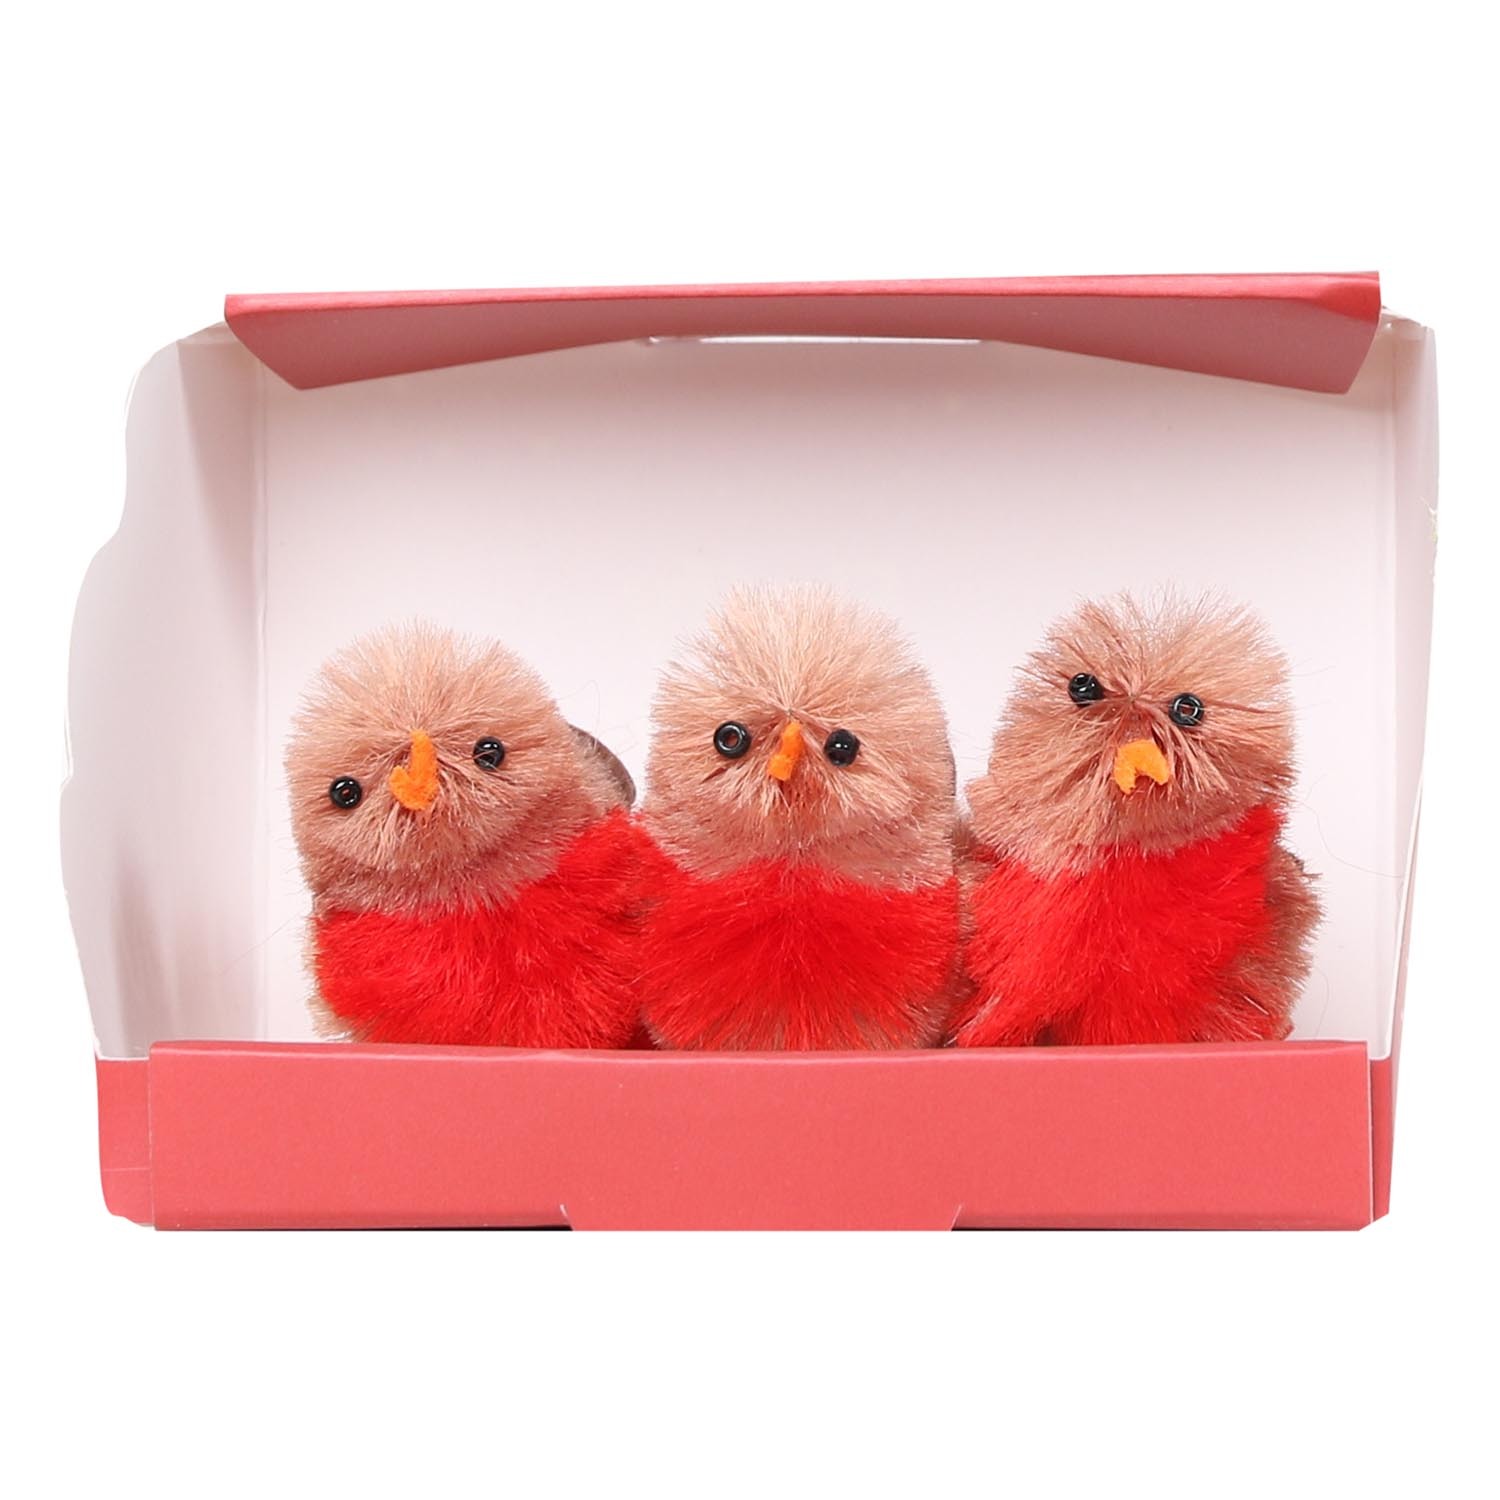 Pack of 6 Fluffy Robins Image